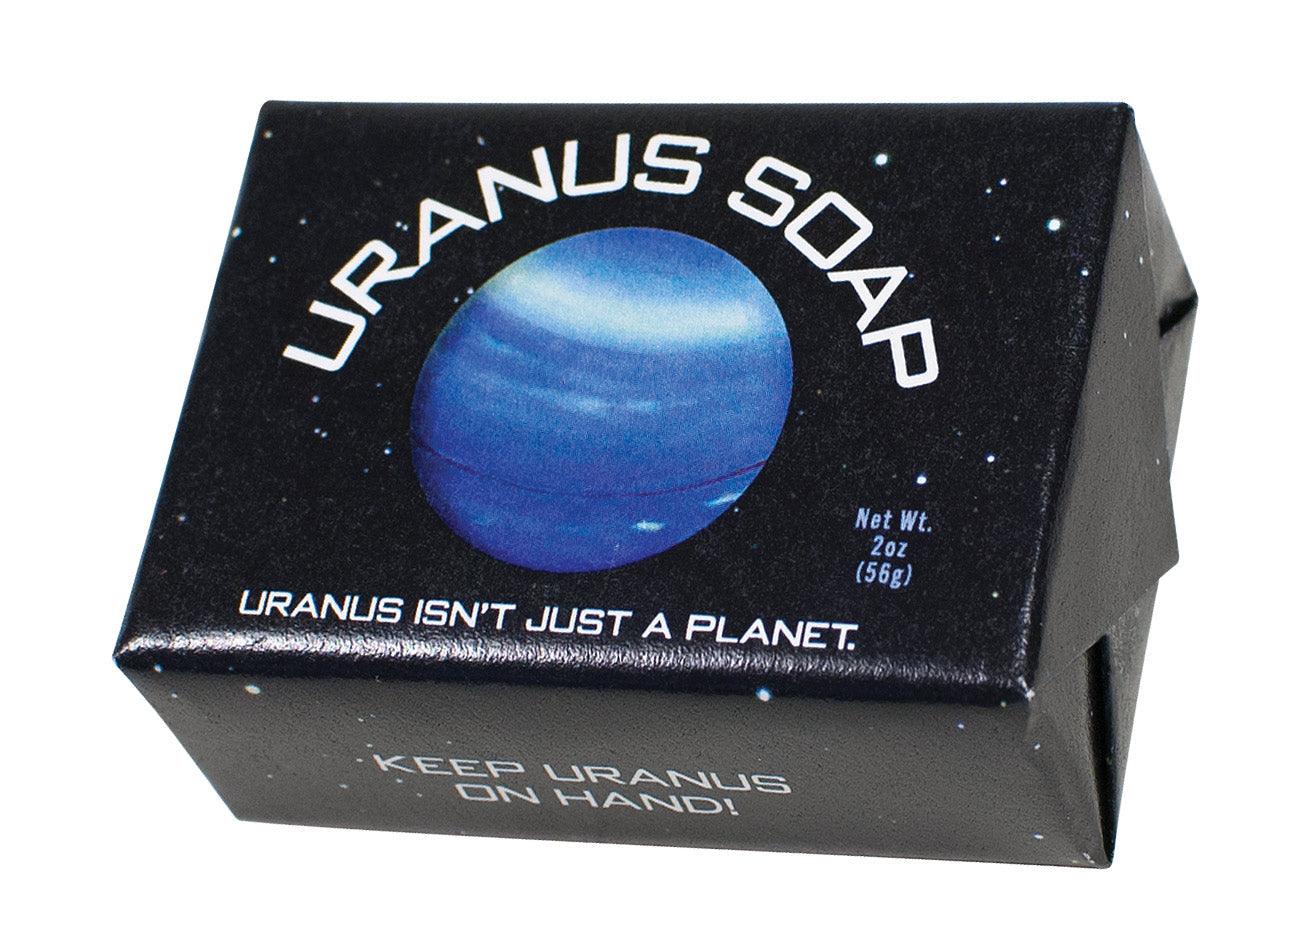 Product photo of Uranus Soap, a novelty gift manufactured by The Unemployed Philosophers Guild.